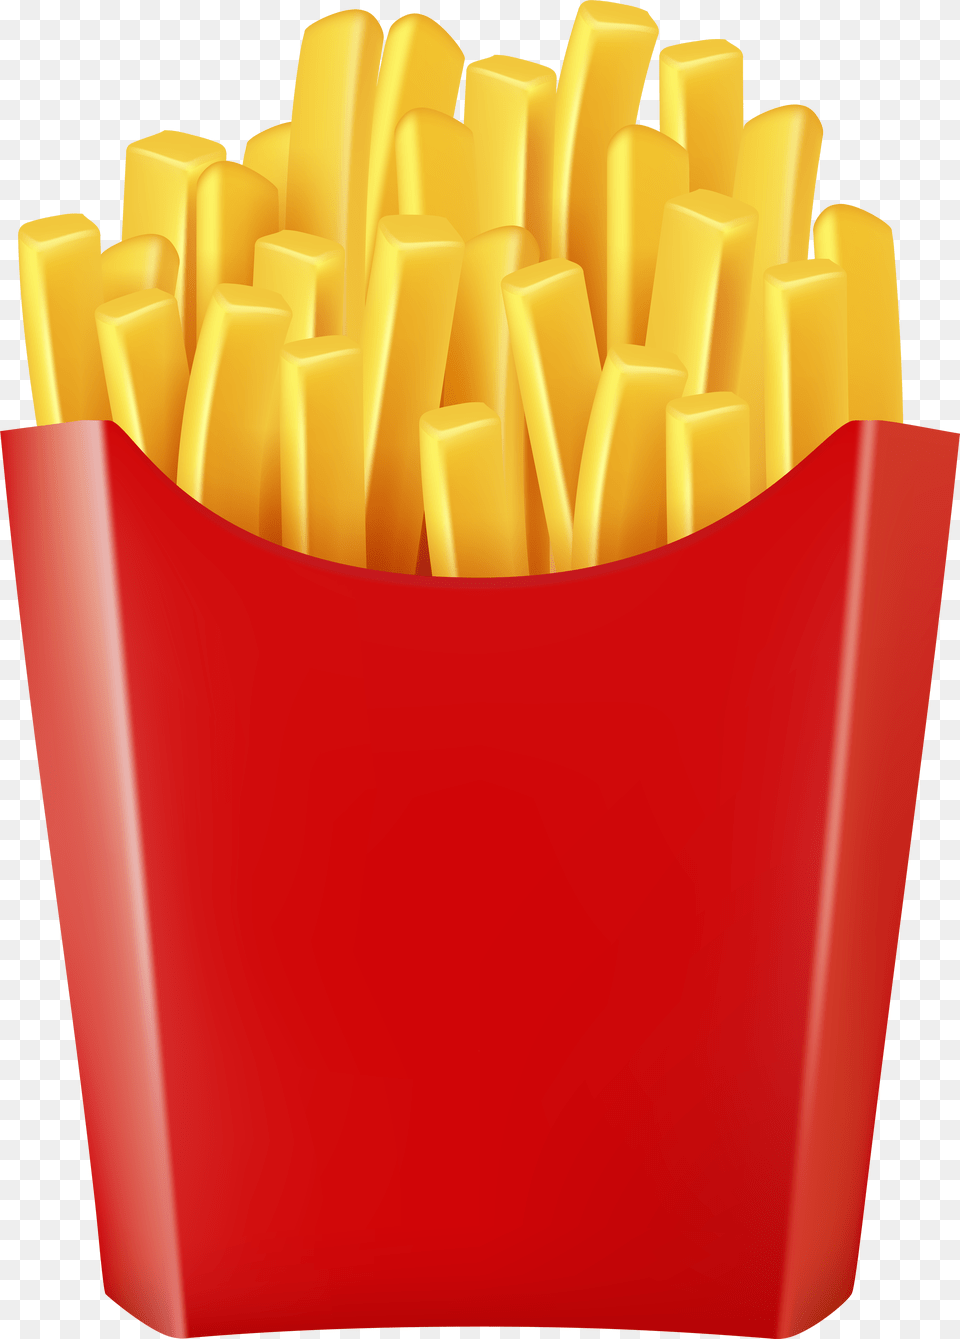 Clipart Of French Fries French Fries Png Image